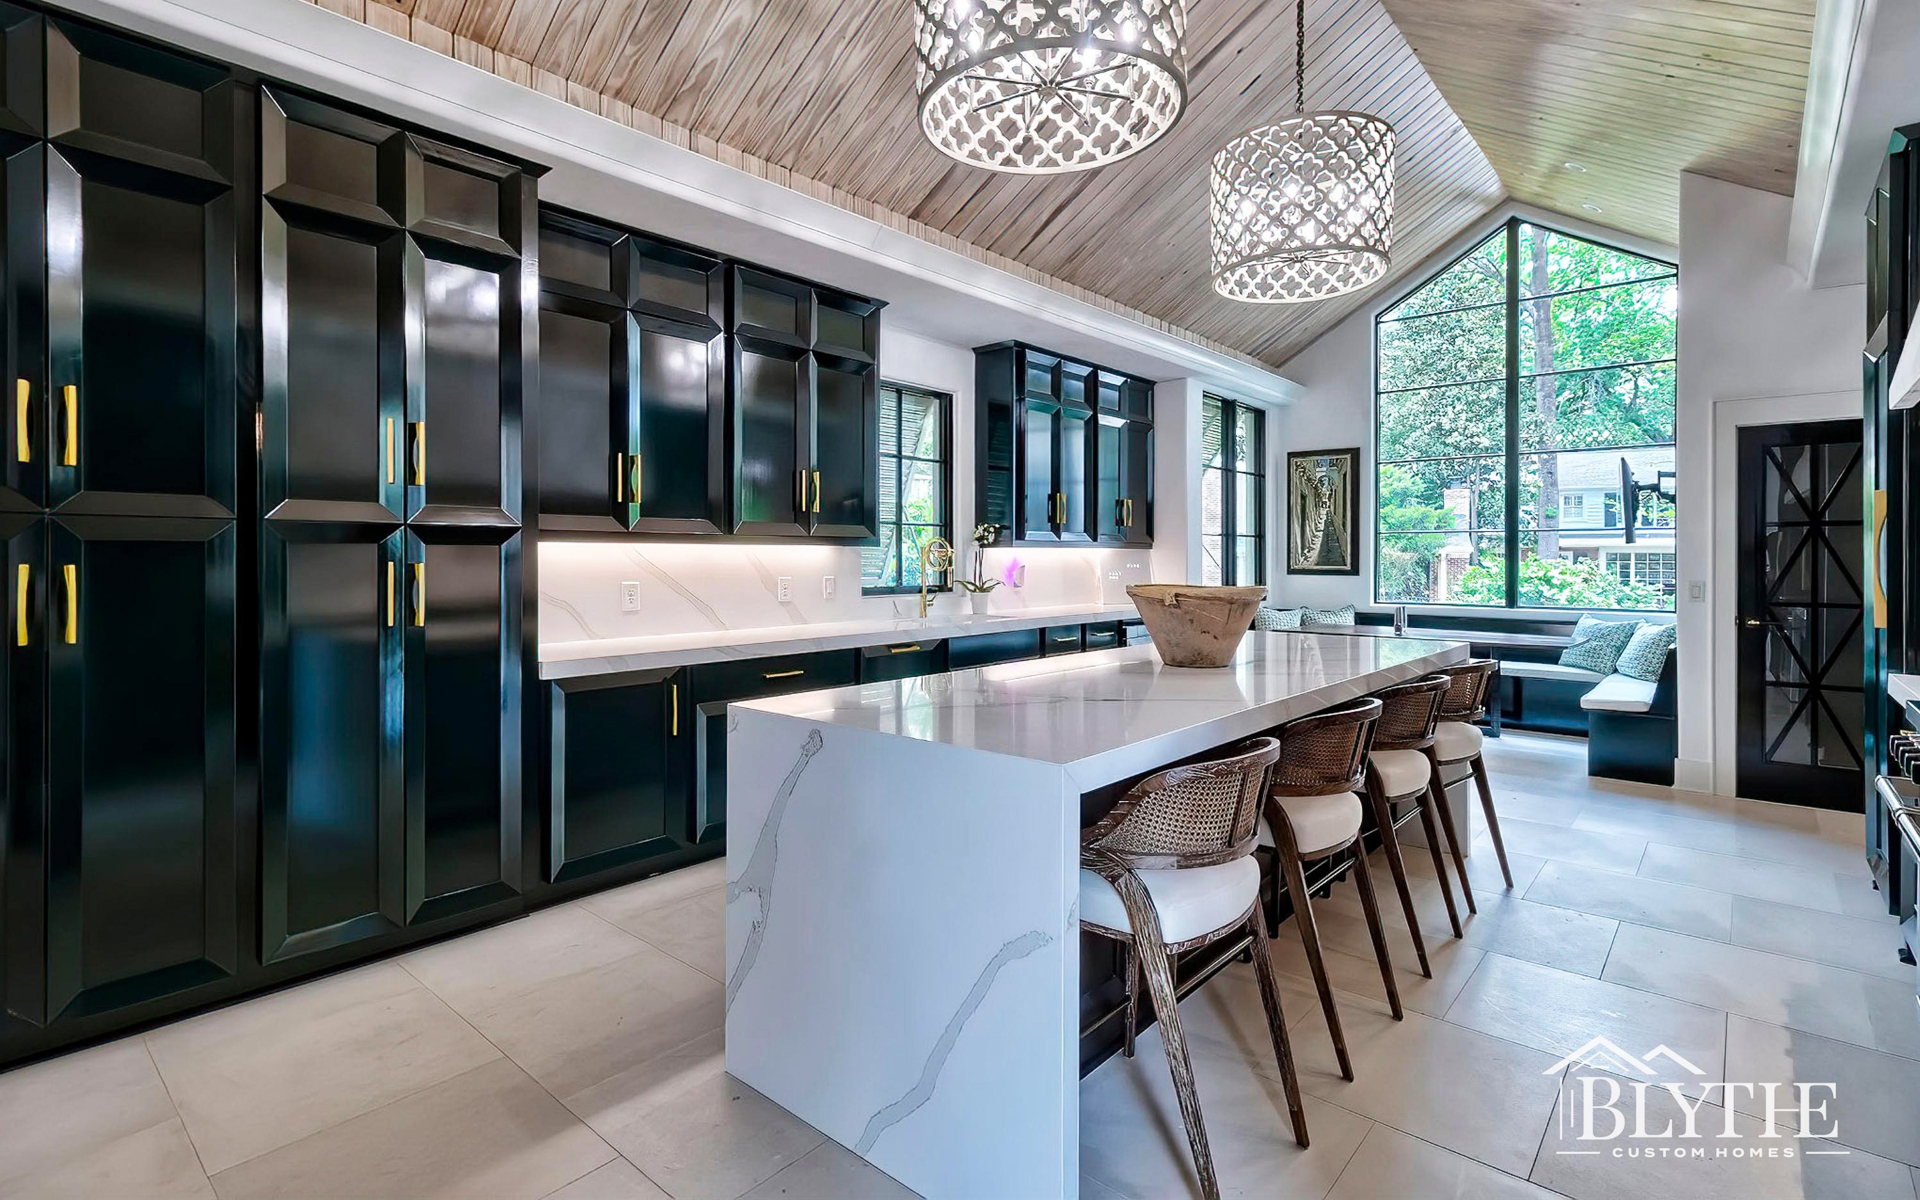 Blythe Custom Homes' Vaulted Cypress Ceiling & Waterfall Kitchen Island